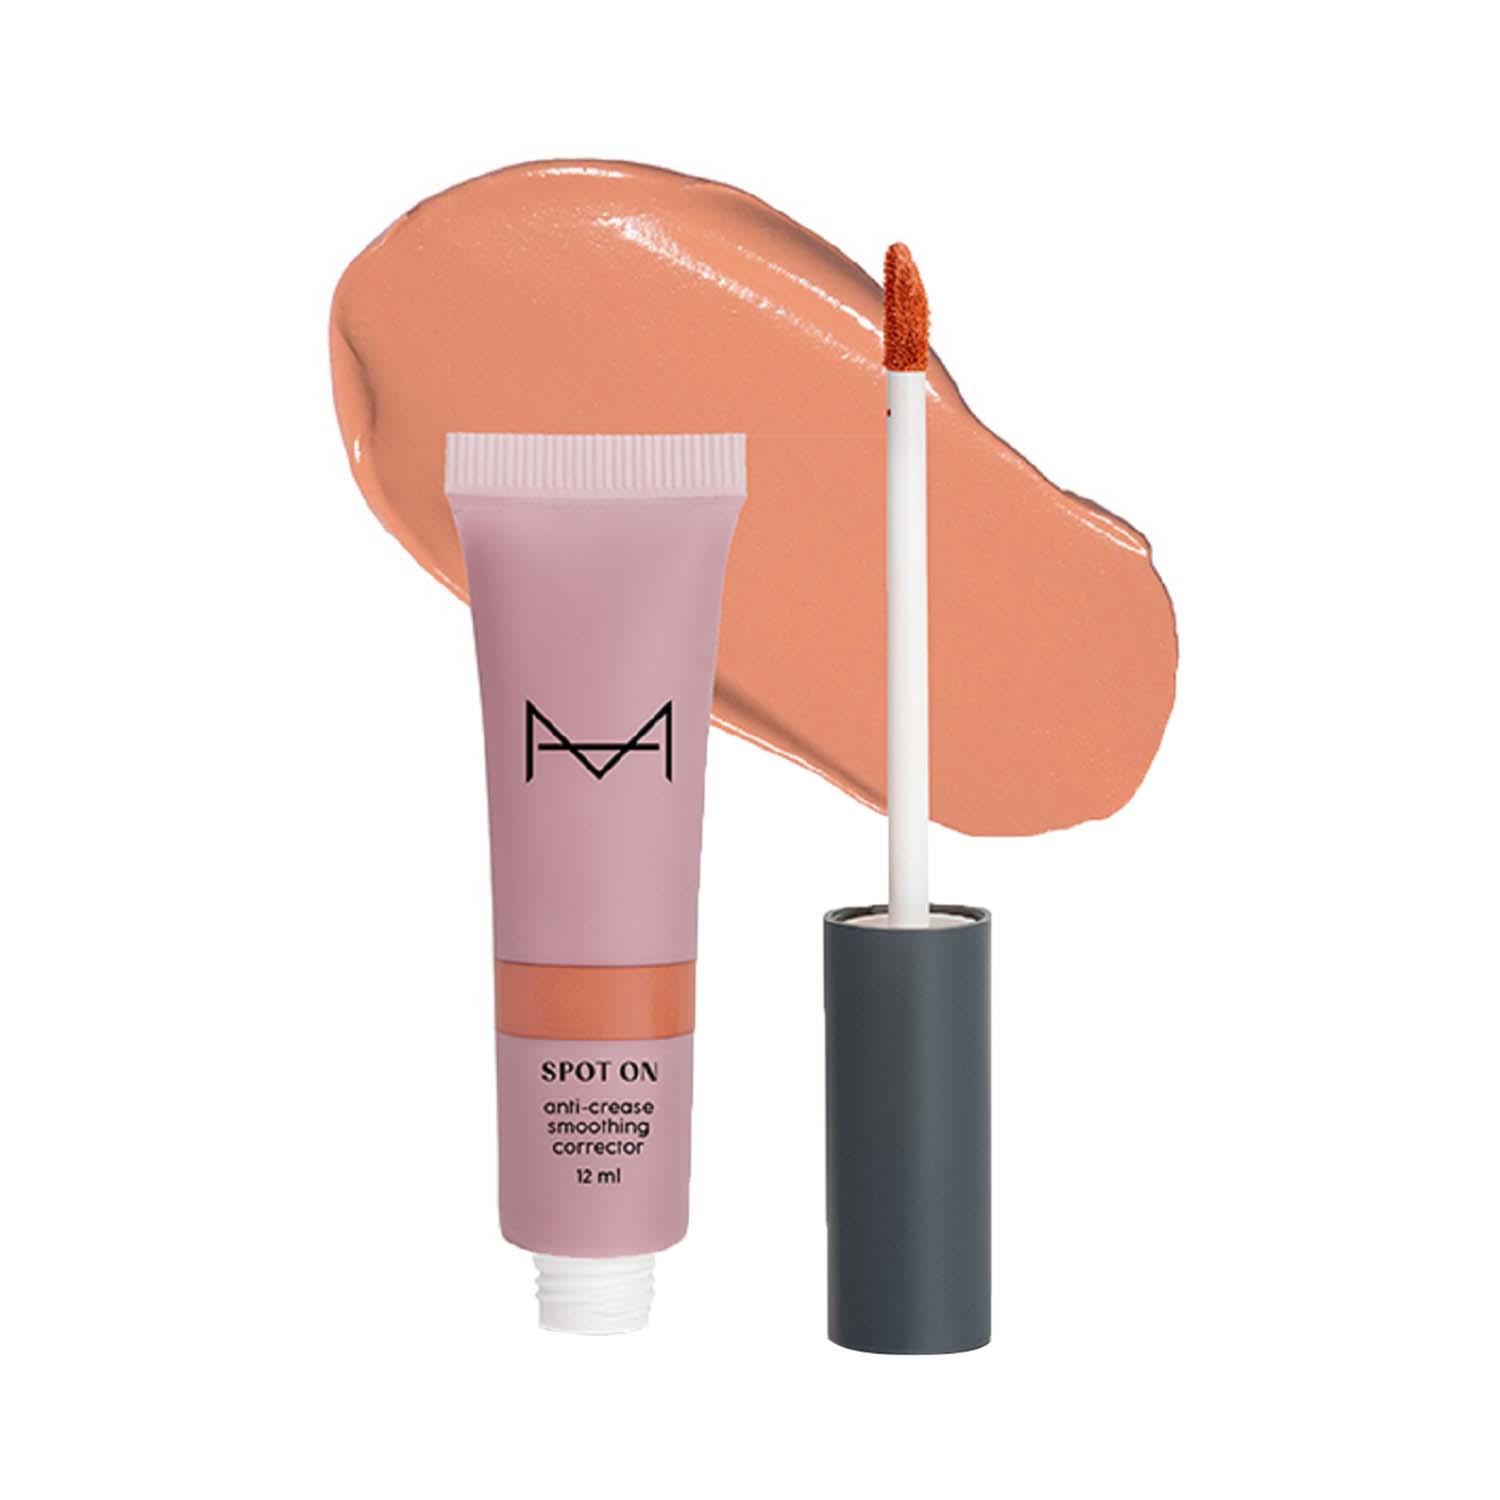 HOUSE OF MAKEUP | HOUSE OF MAKEUP Spot On Color Corrector Peach - Fair To Light Skin Tone (12 ml)